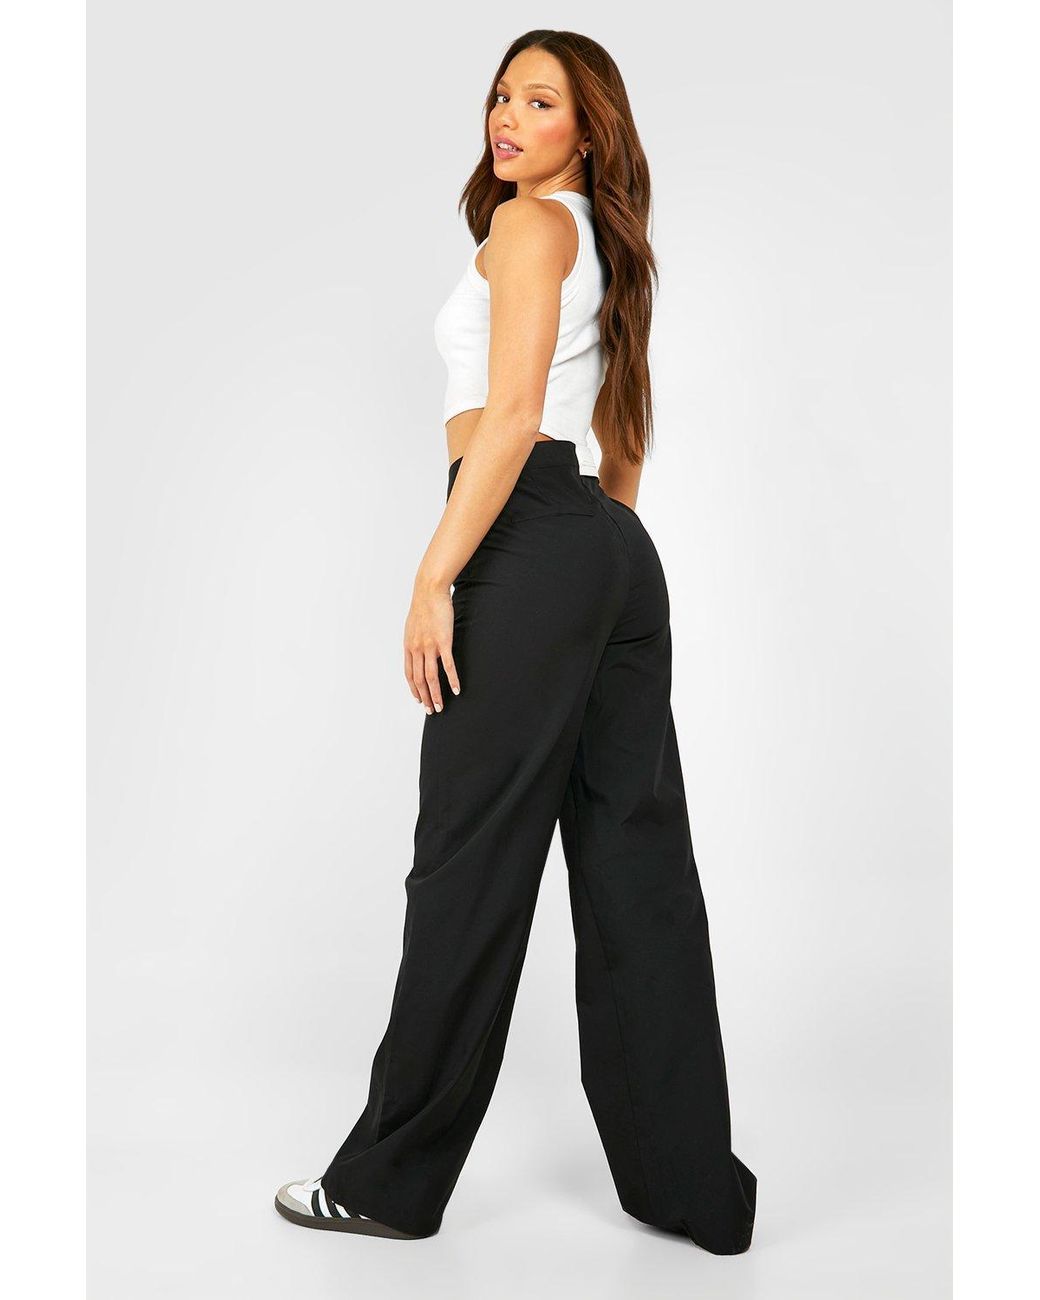 Boohoo Tall Woven Fold Over Waist Detail Trousers in Black